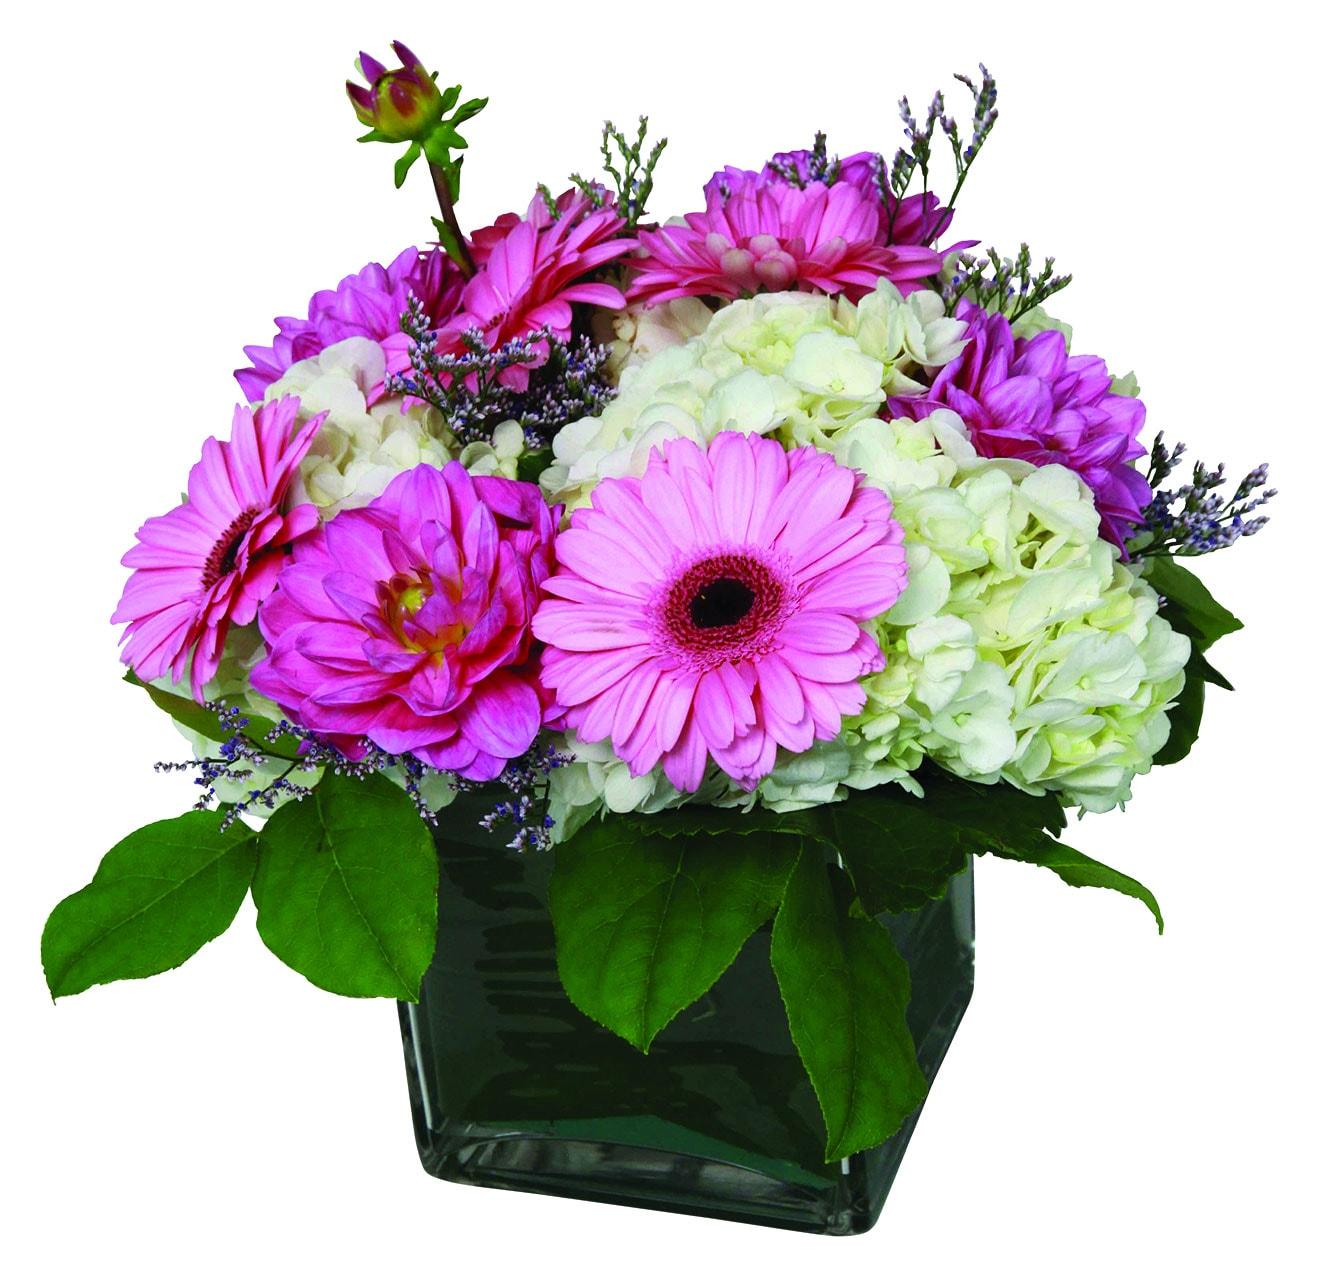 A fresh arrangement with white hydrangea, pink mini gerberas, fancy greens and fillers.